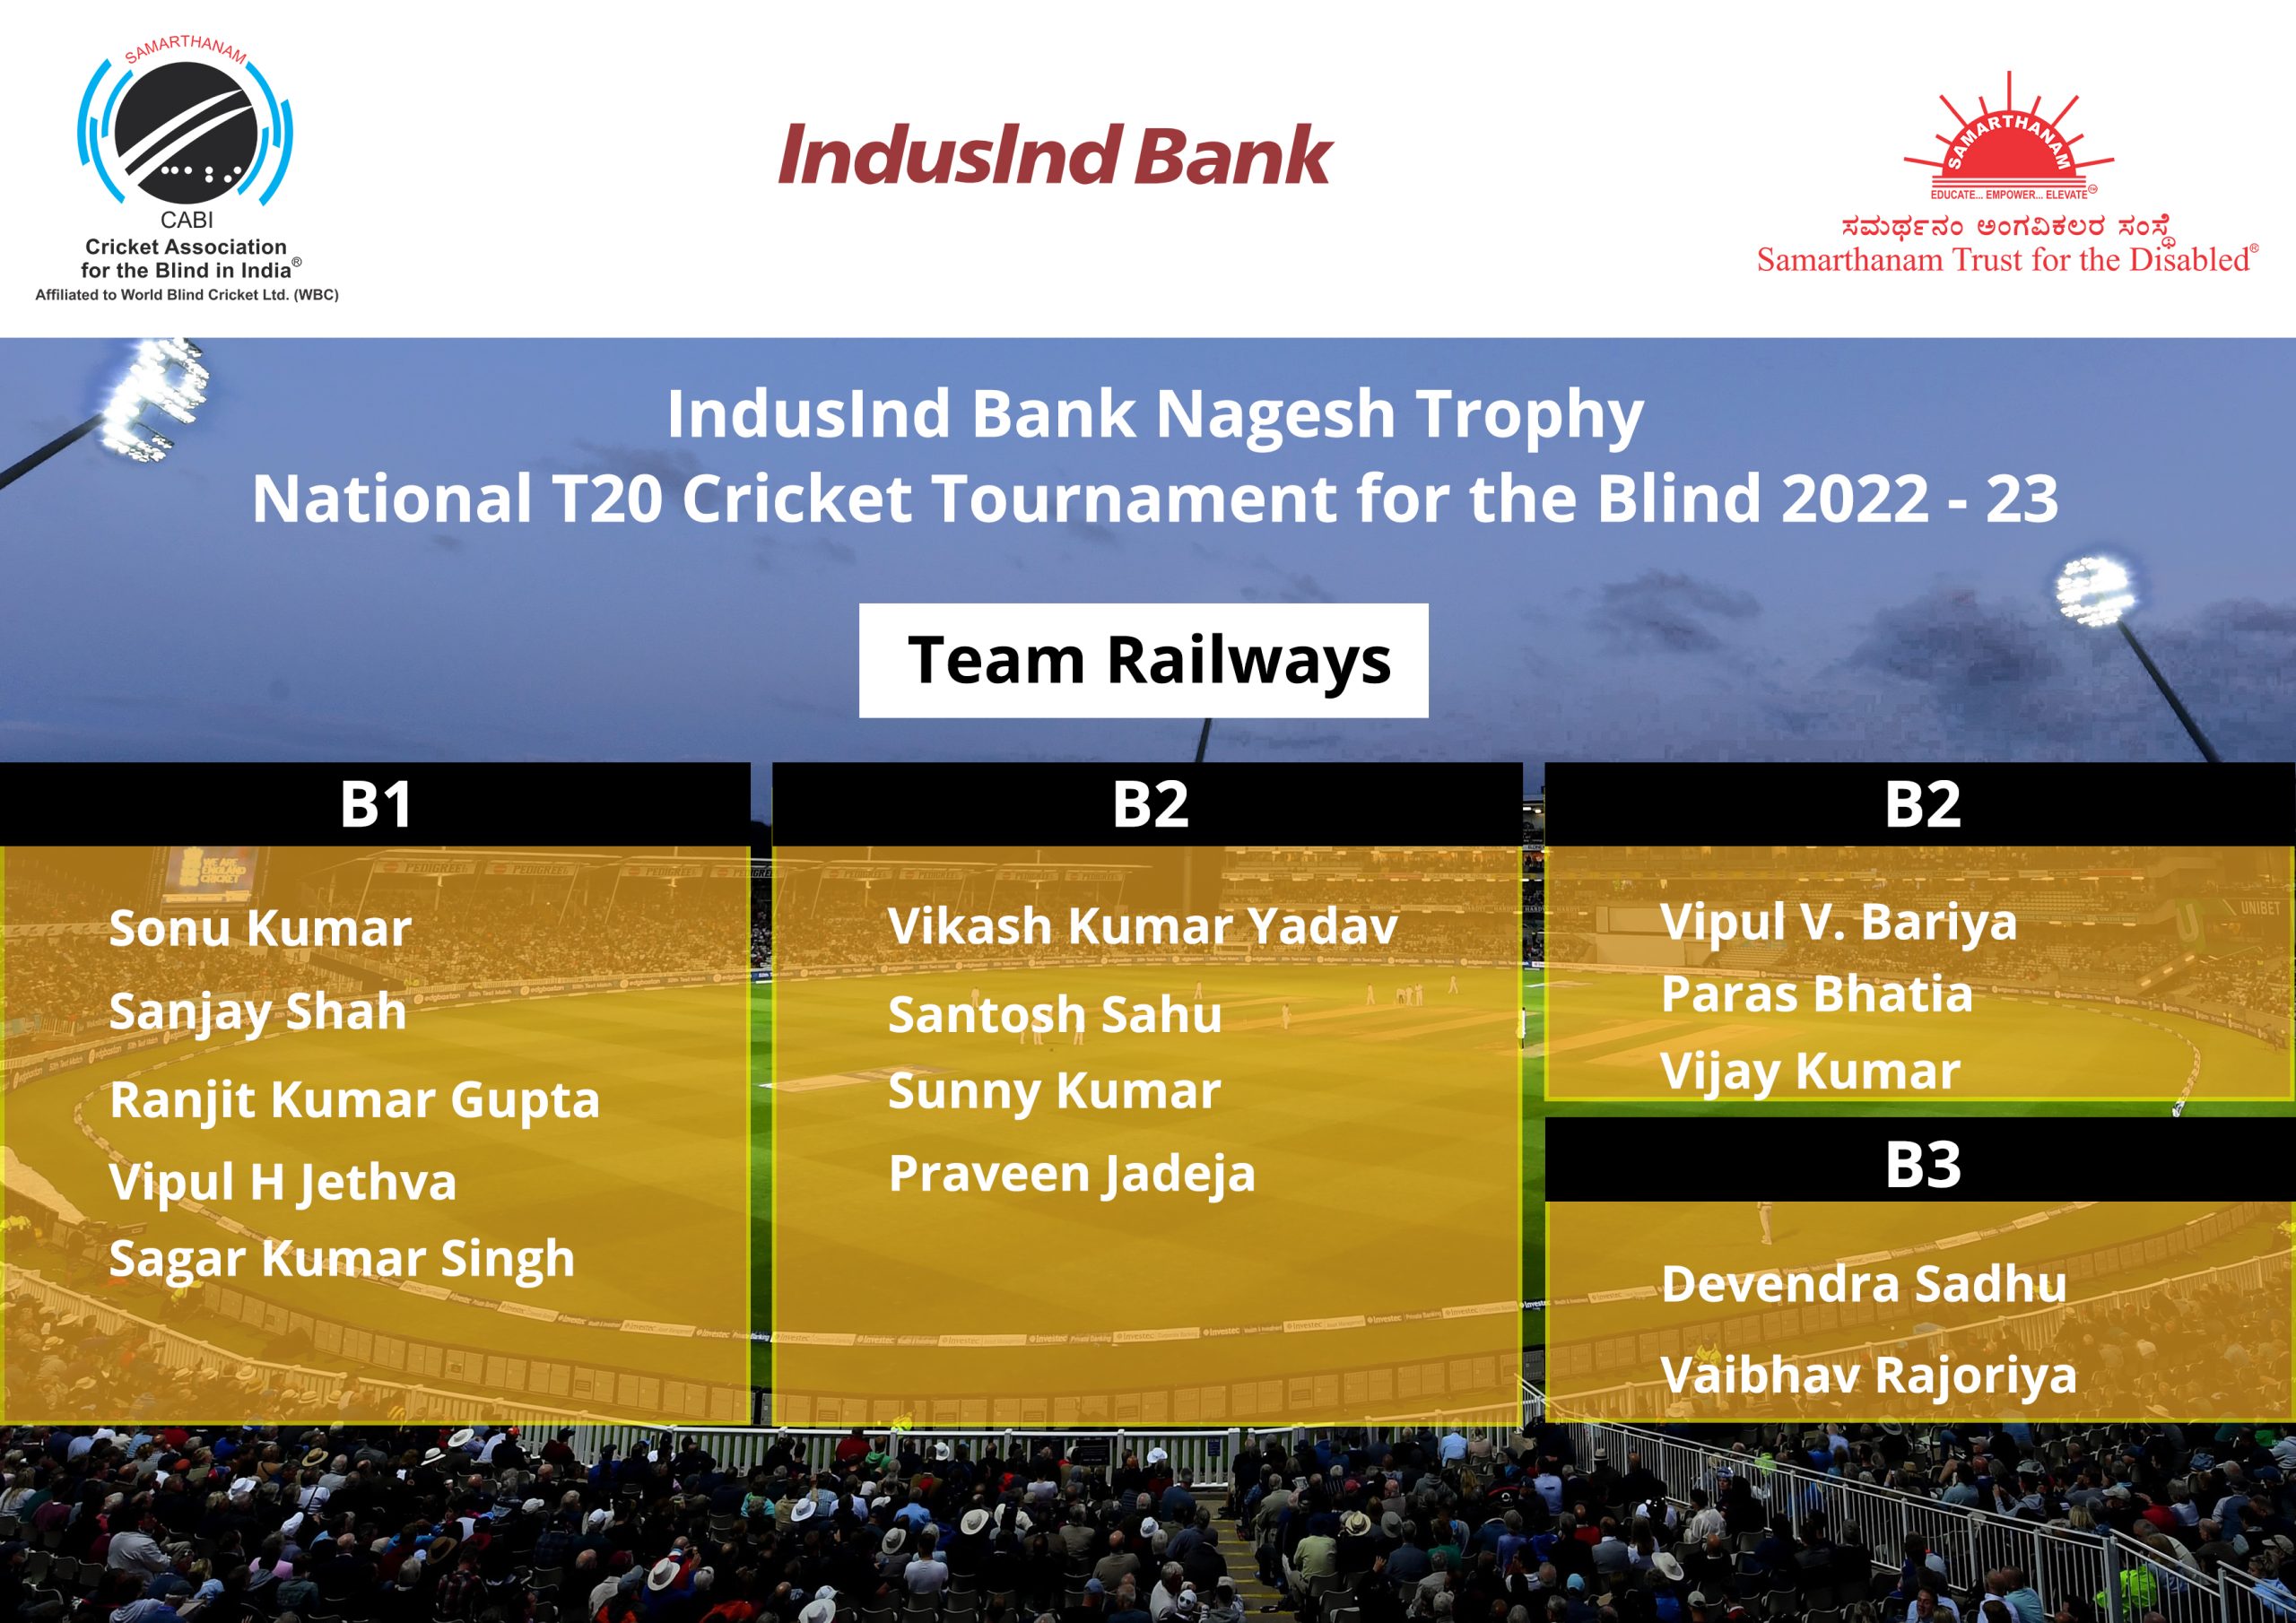 Team Railways of IndusInd Bank Nagesh Trophy National T20 Cricket Tournament For The Blind 2022-23